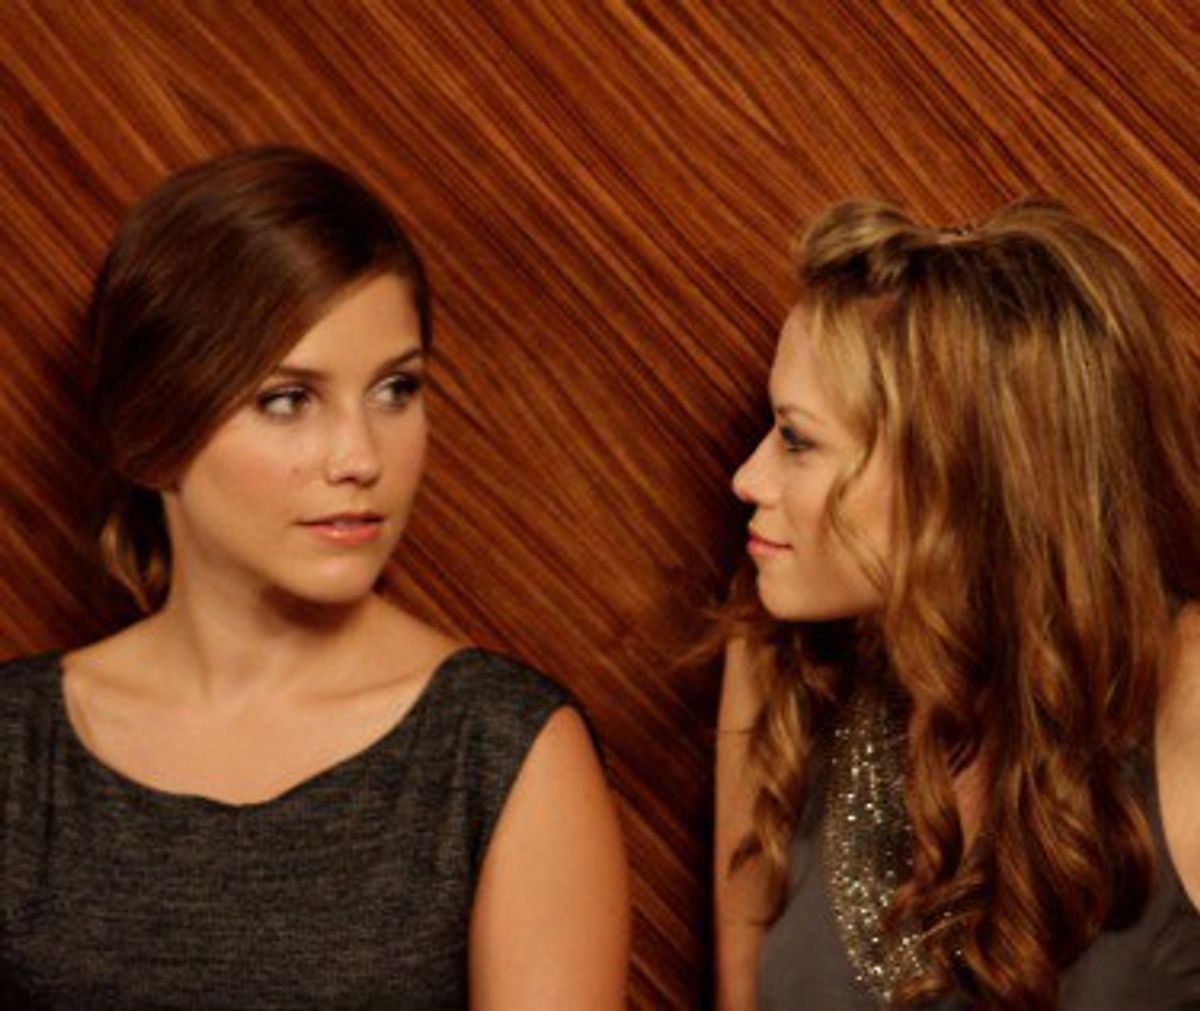 Why Brooke And Haley Have The Best Friendship on 'One Tree Hill'